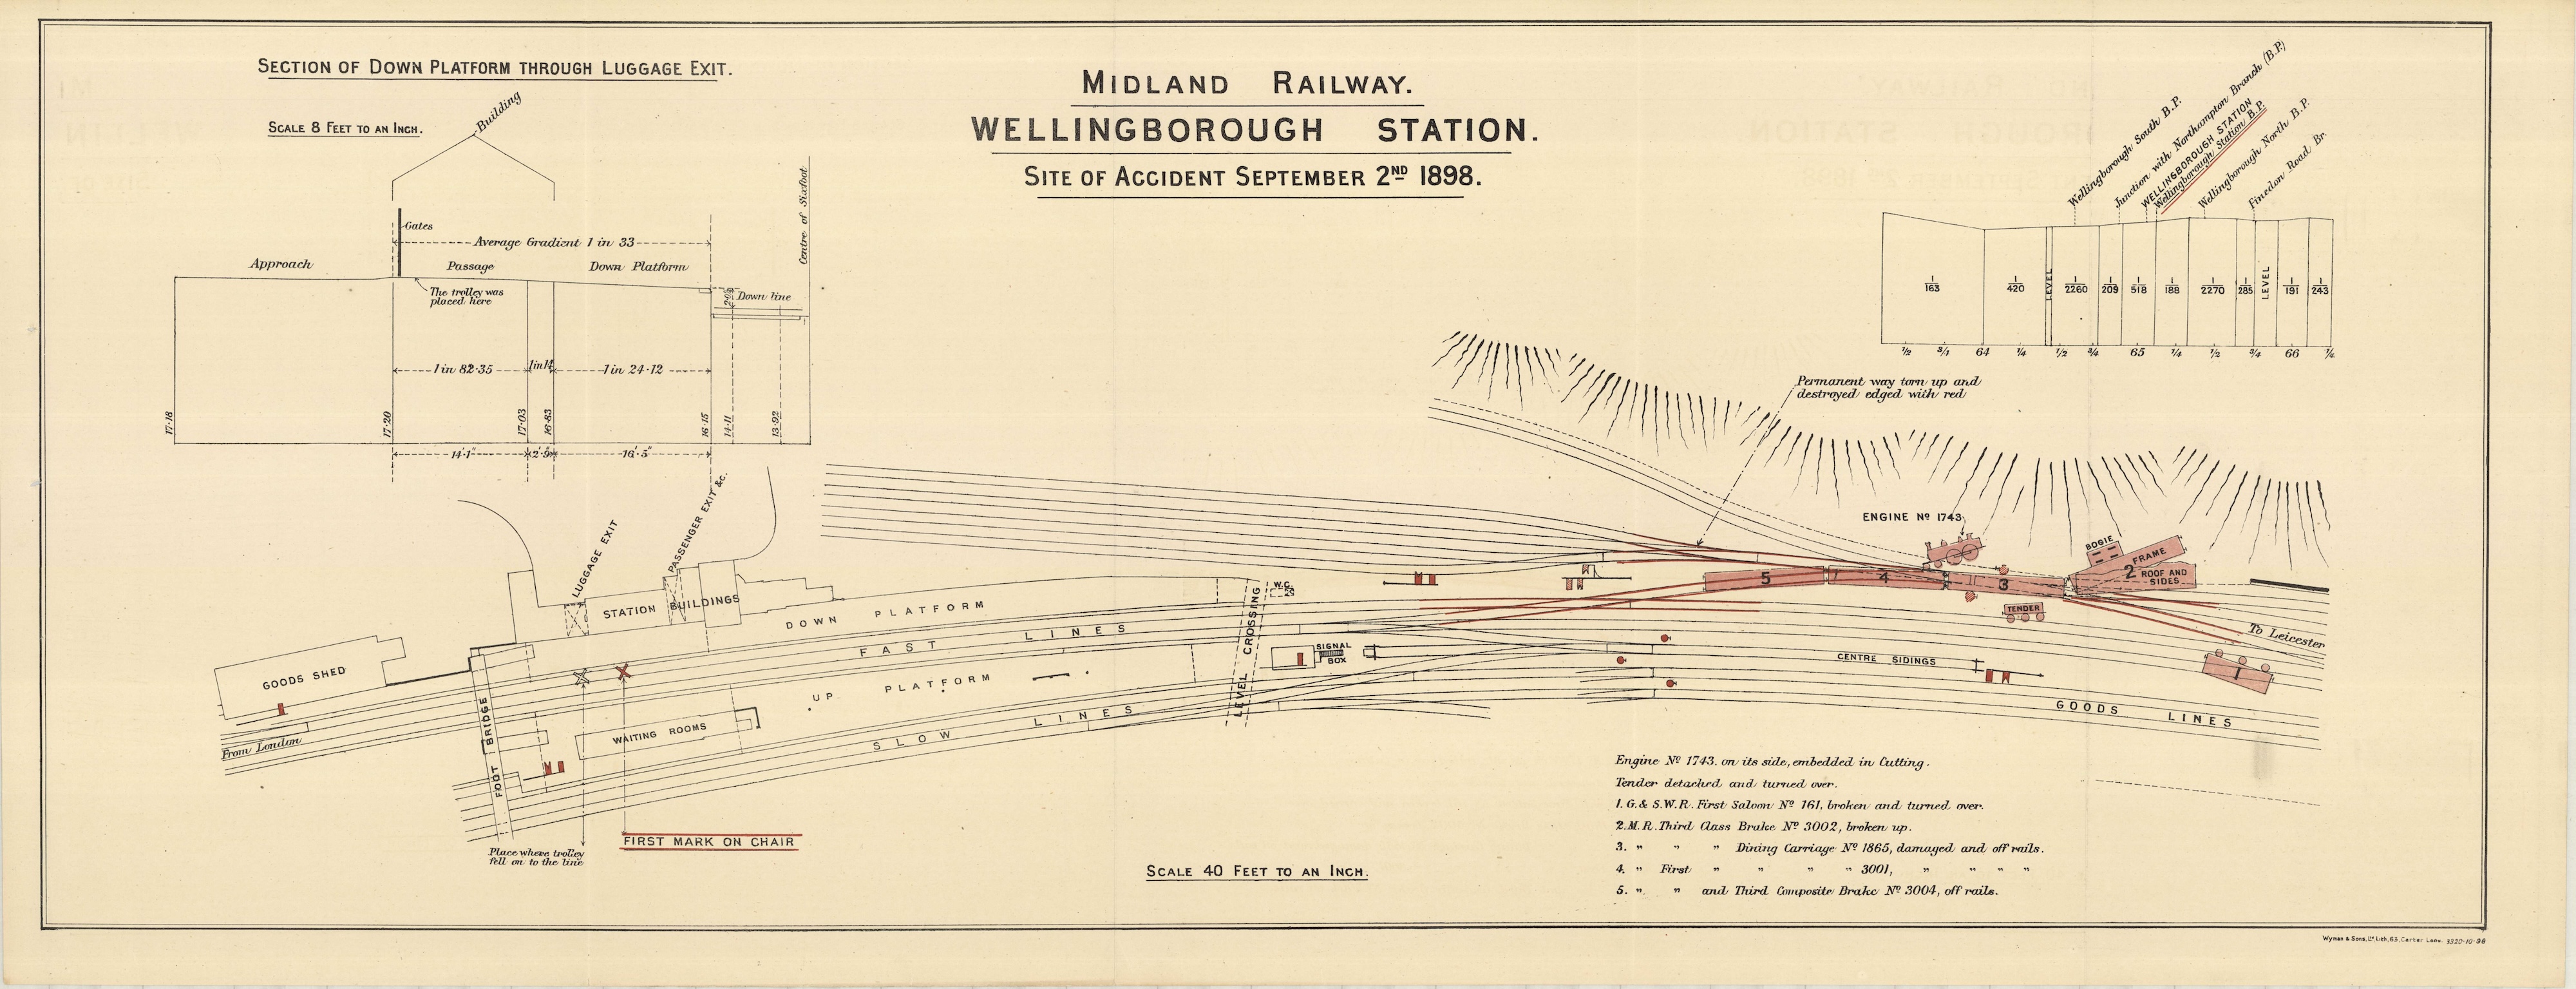 The plan of the site of a railway accident at Wellingborough which happened on 2nd October 1898